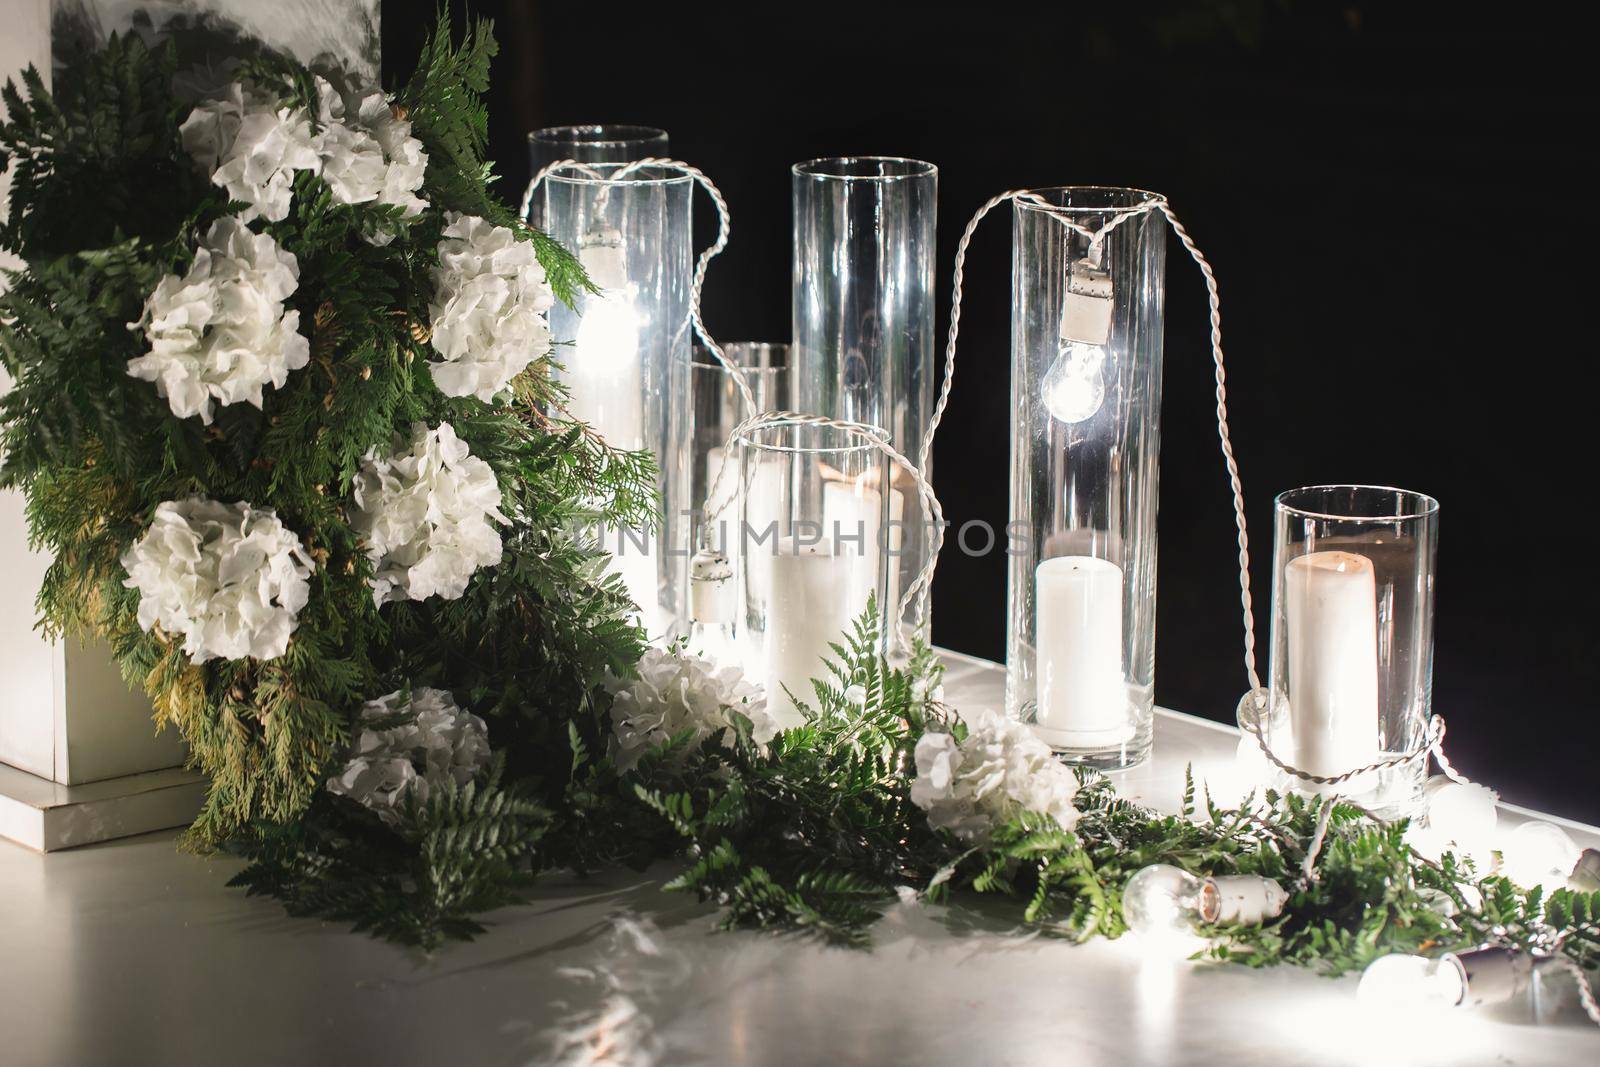 Wedding decor: delicate flowers and burning candles.